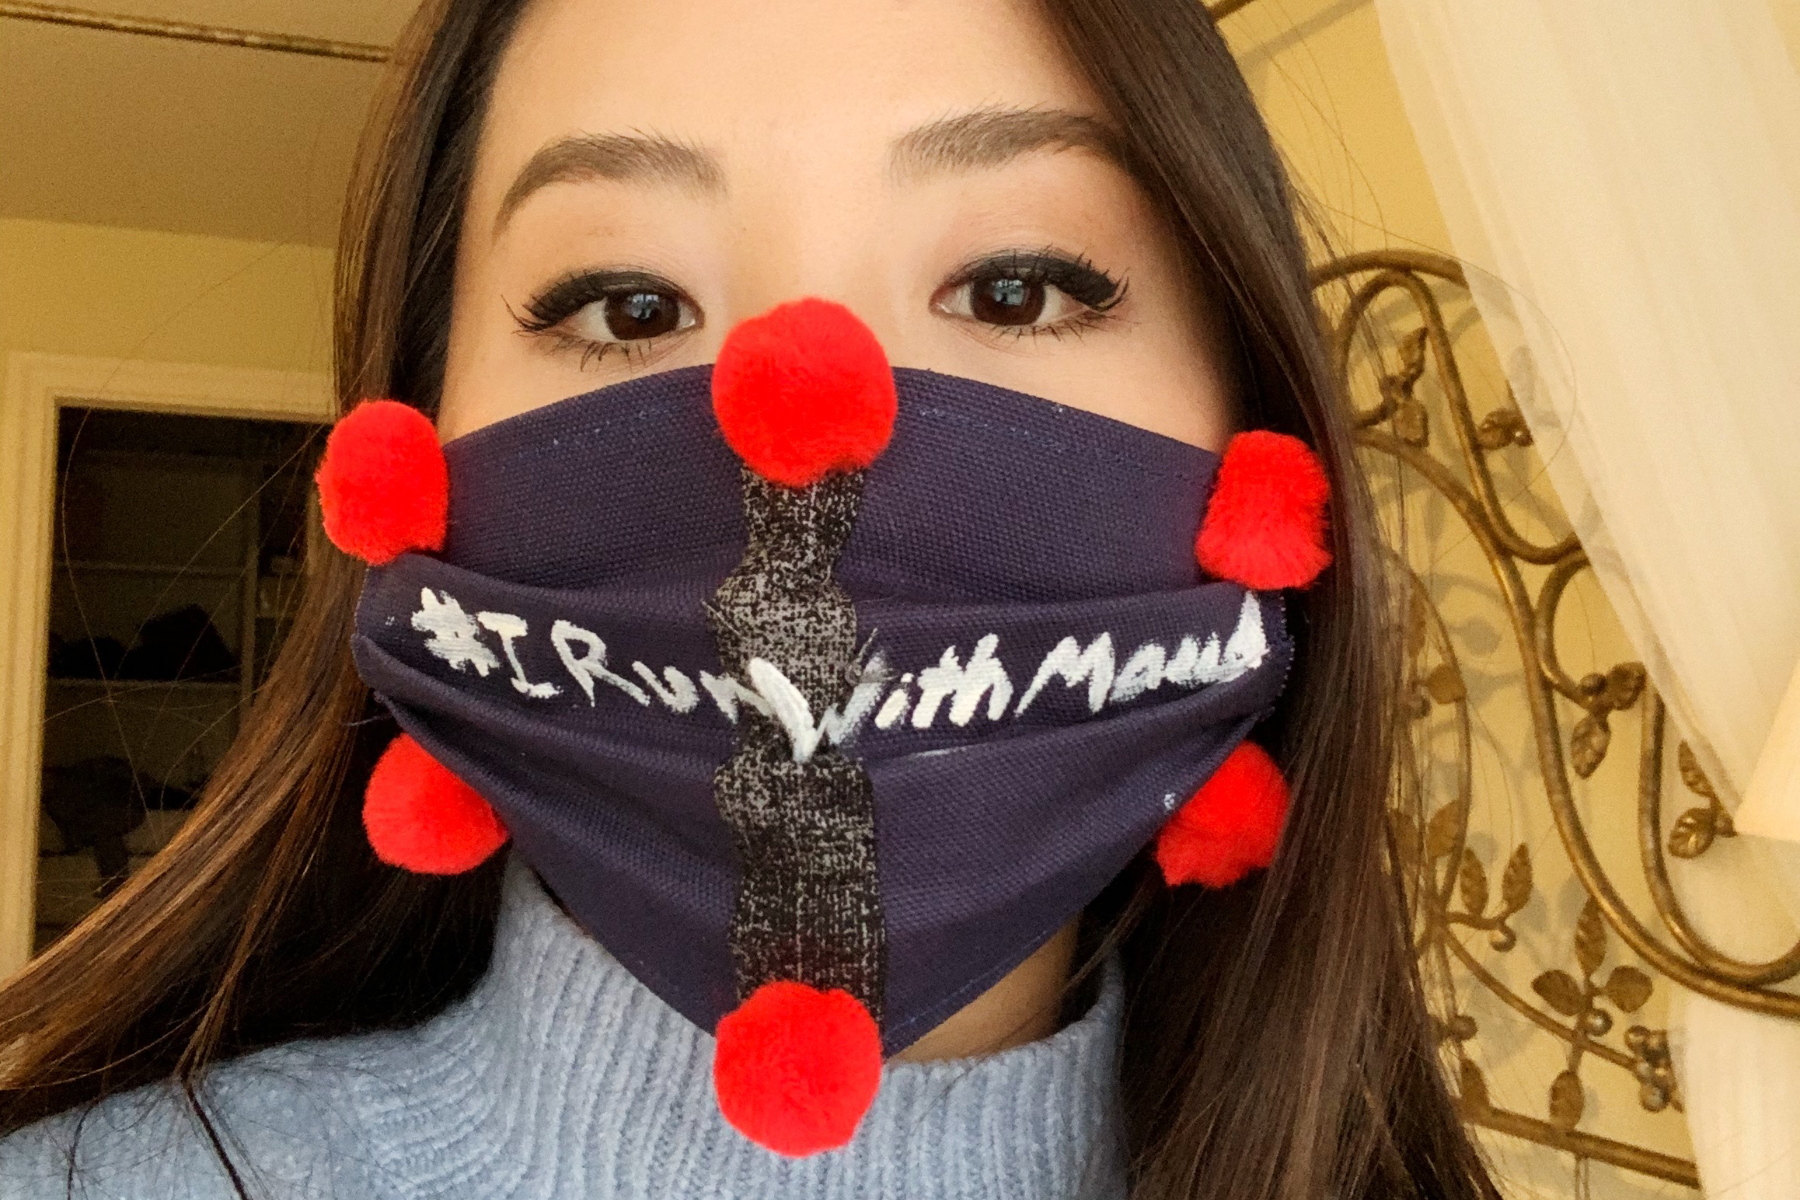 student wearing a dark mask with pom-poms with words #IRunWithMaud